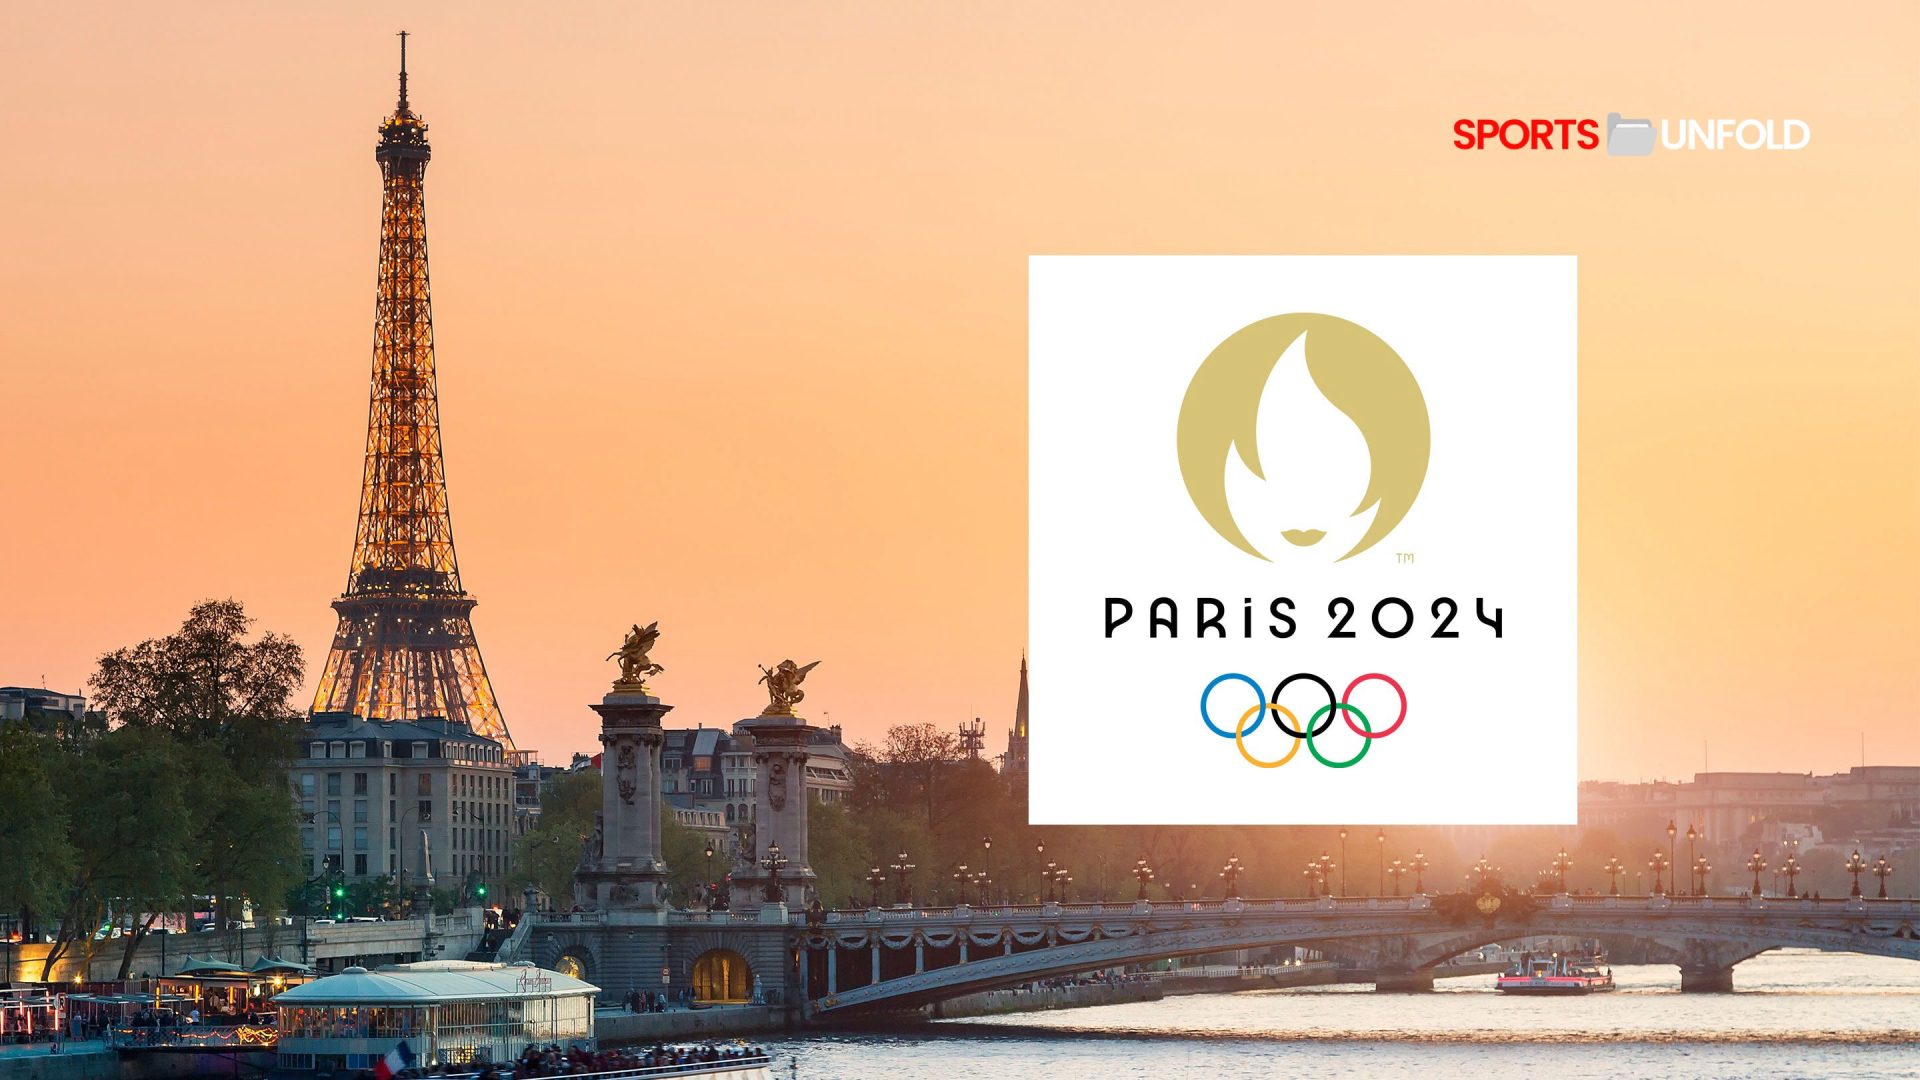 Paris 2024 Summer Olympics Broadcasters List Where to watch Live